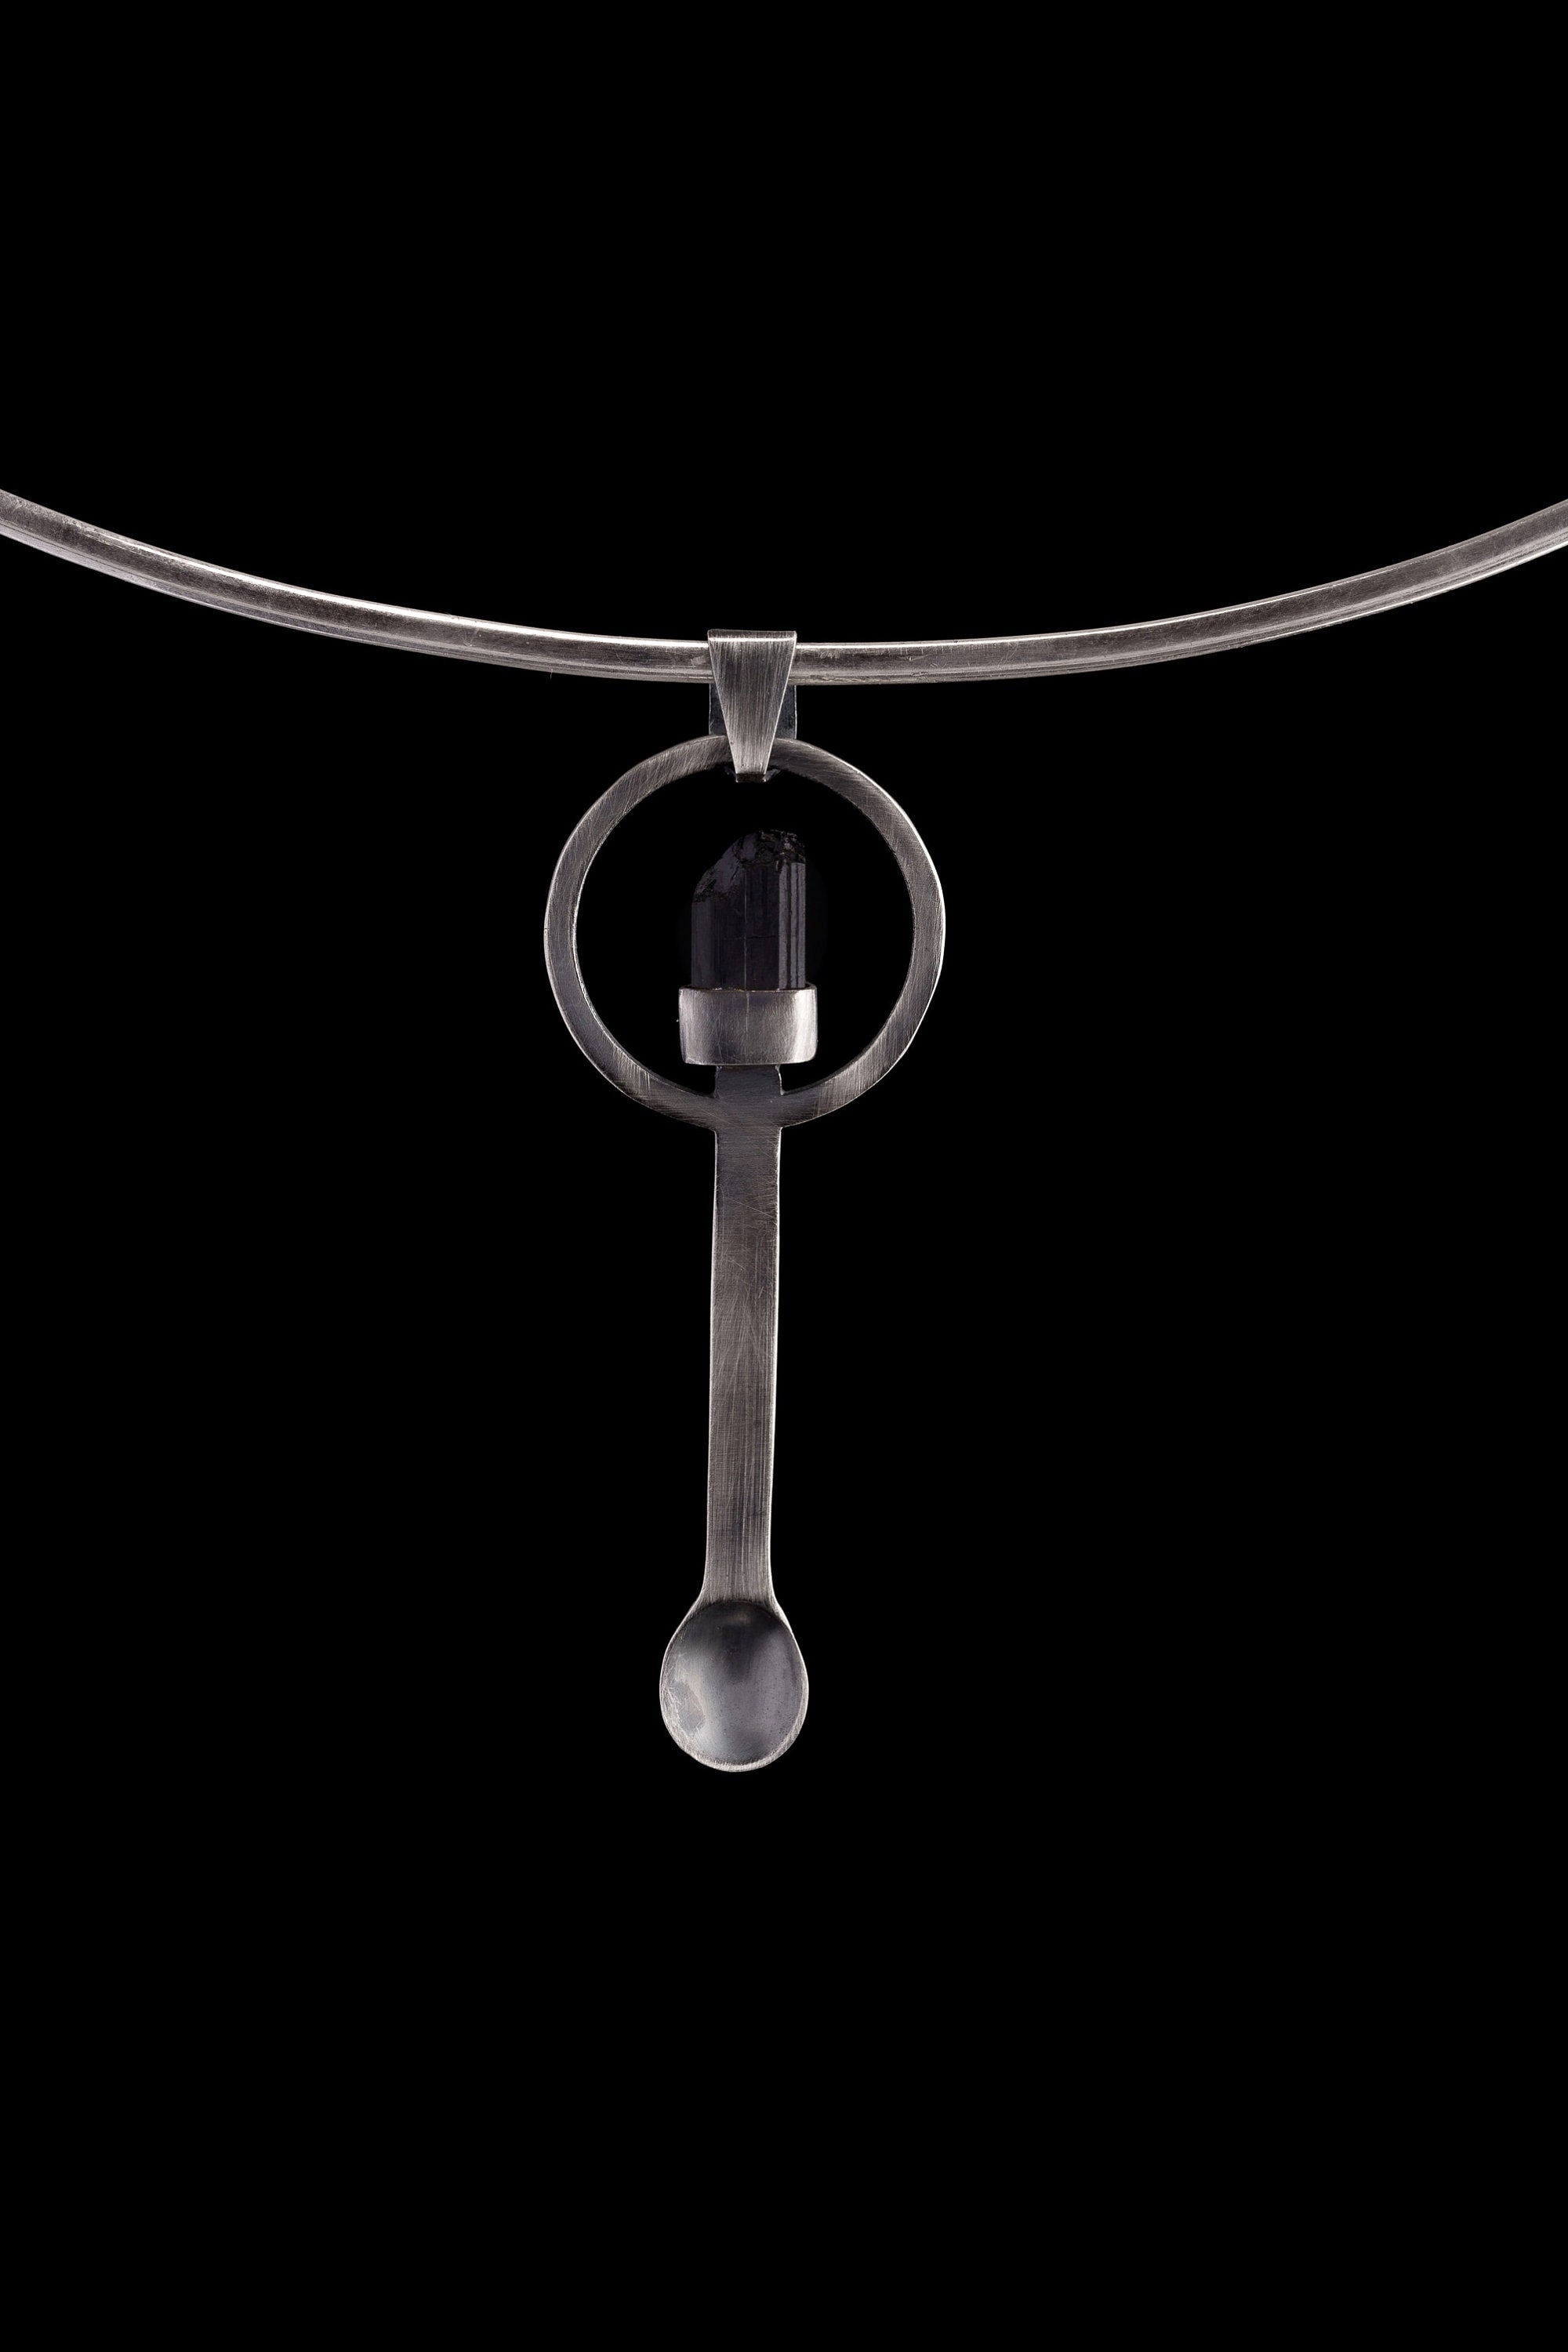 Black Tourmaline - Small Spice / Ceremonial Spoon - Solid 925 Cast Silver - Oxidised Brush Textured - Crystal Pendant Necklace